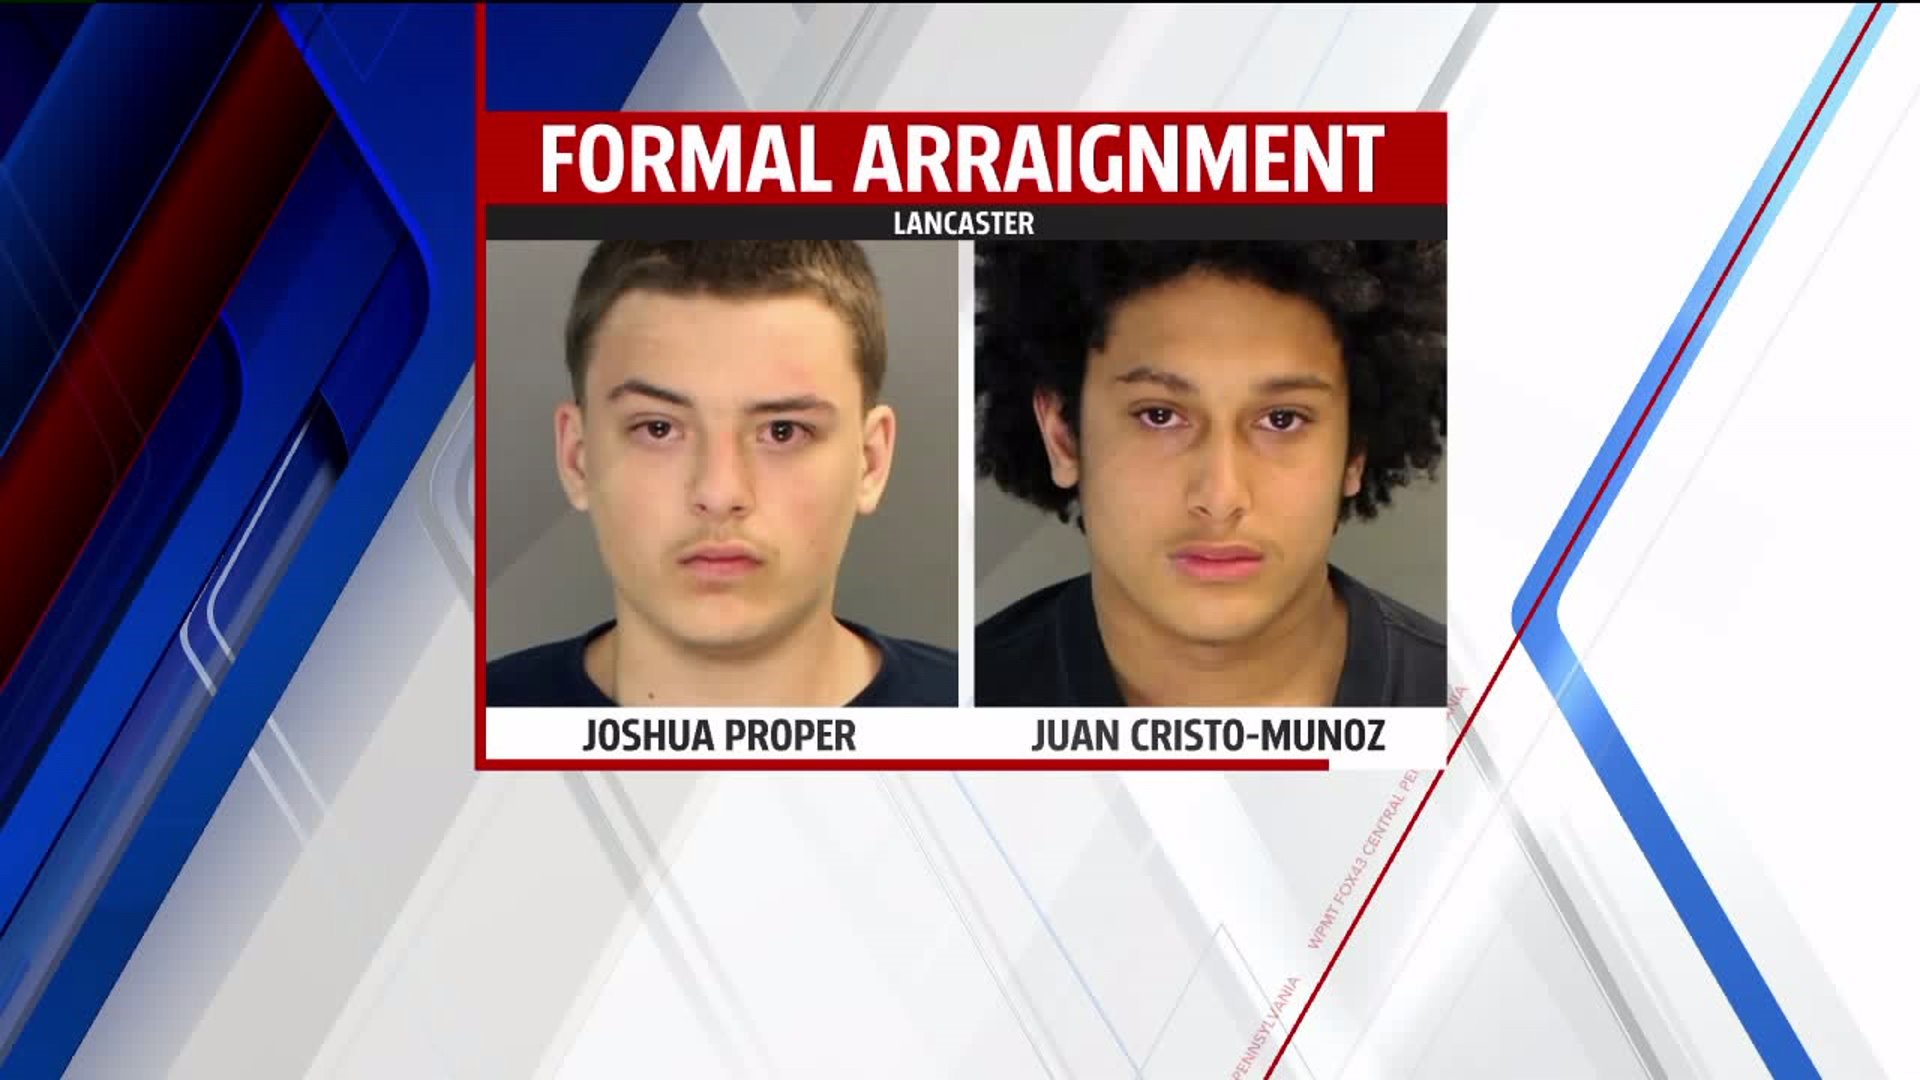 The formal arrangement is today for two teenagers accused of killing two brothers in Lancaster County